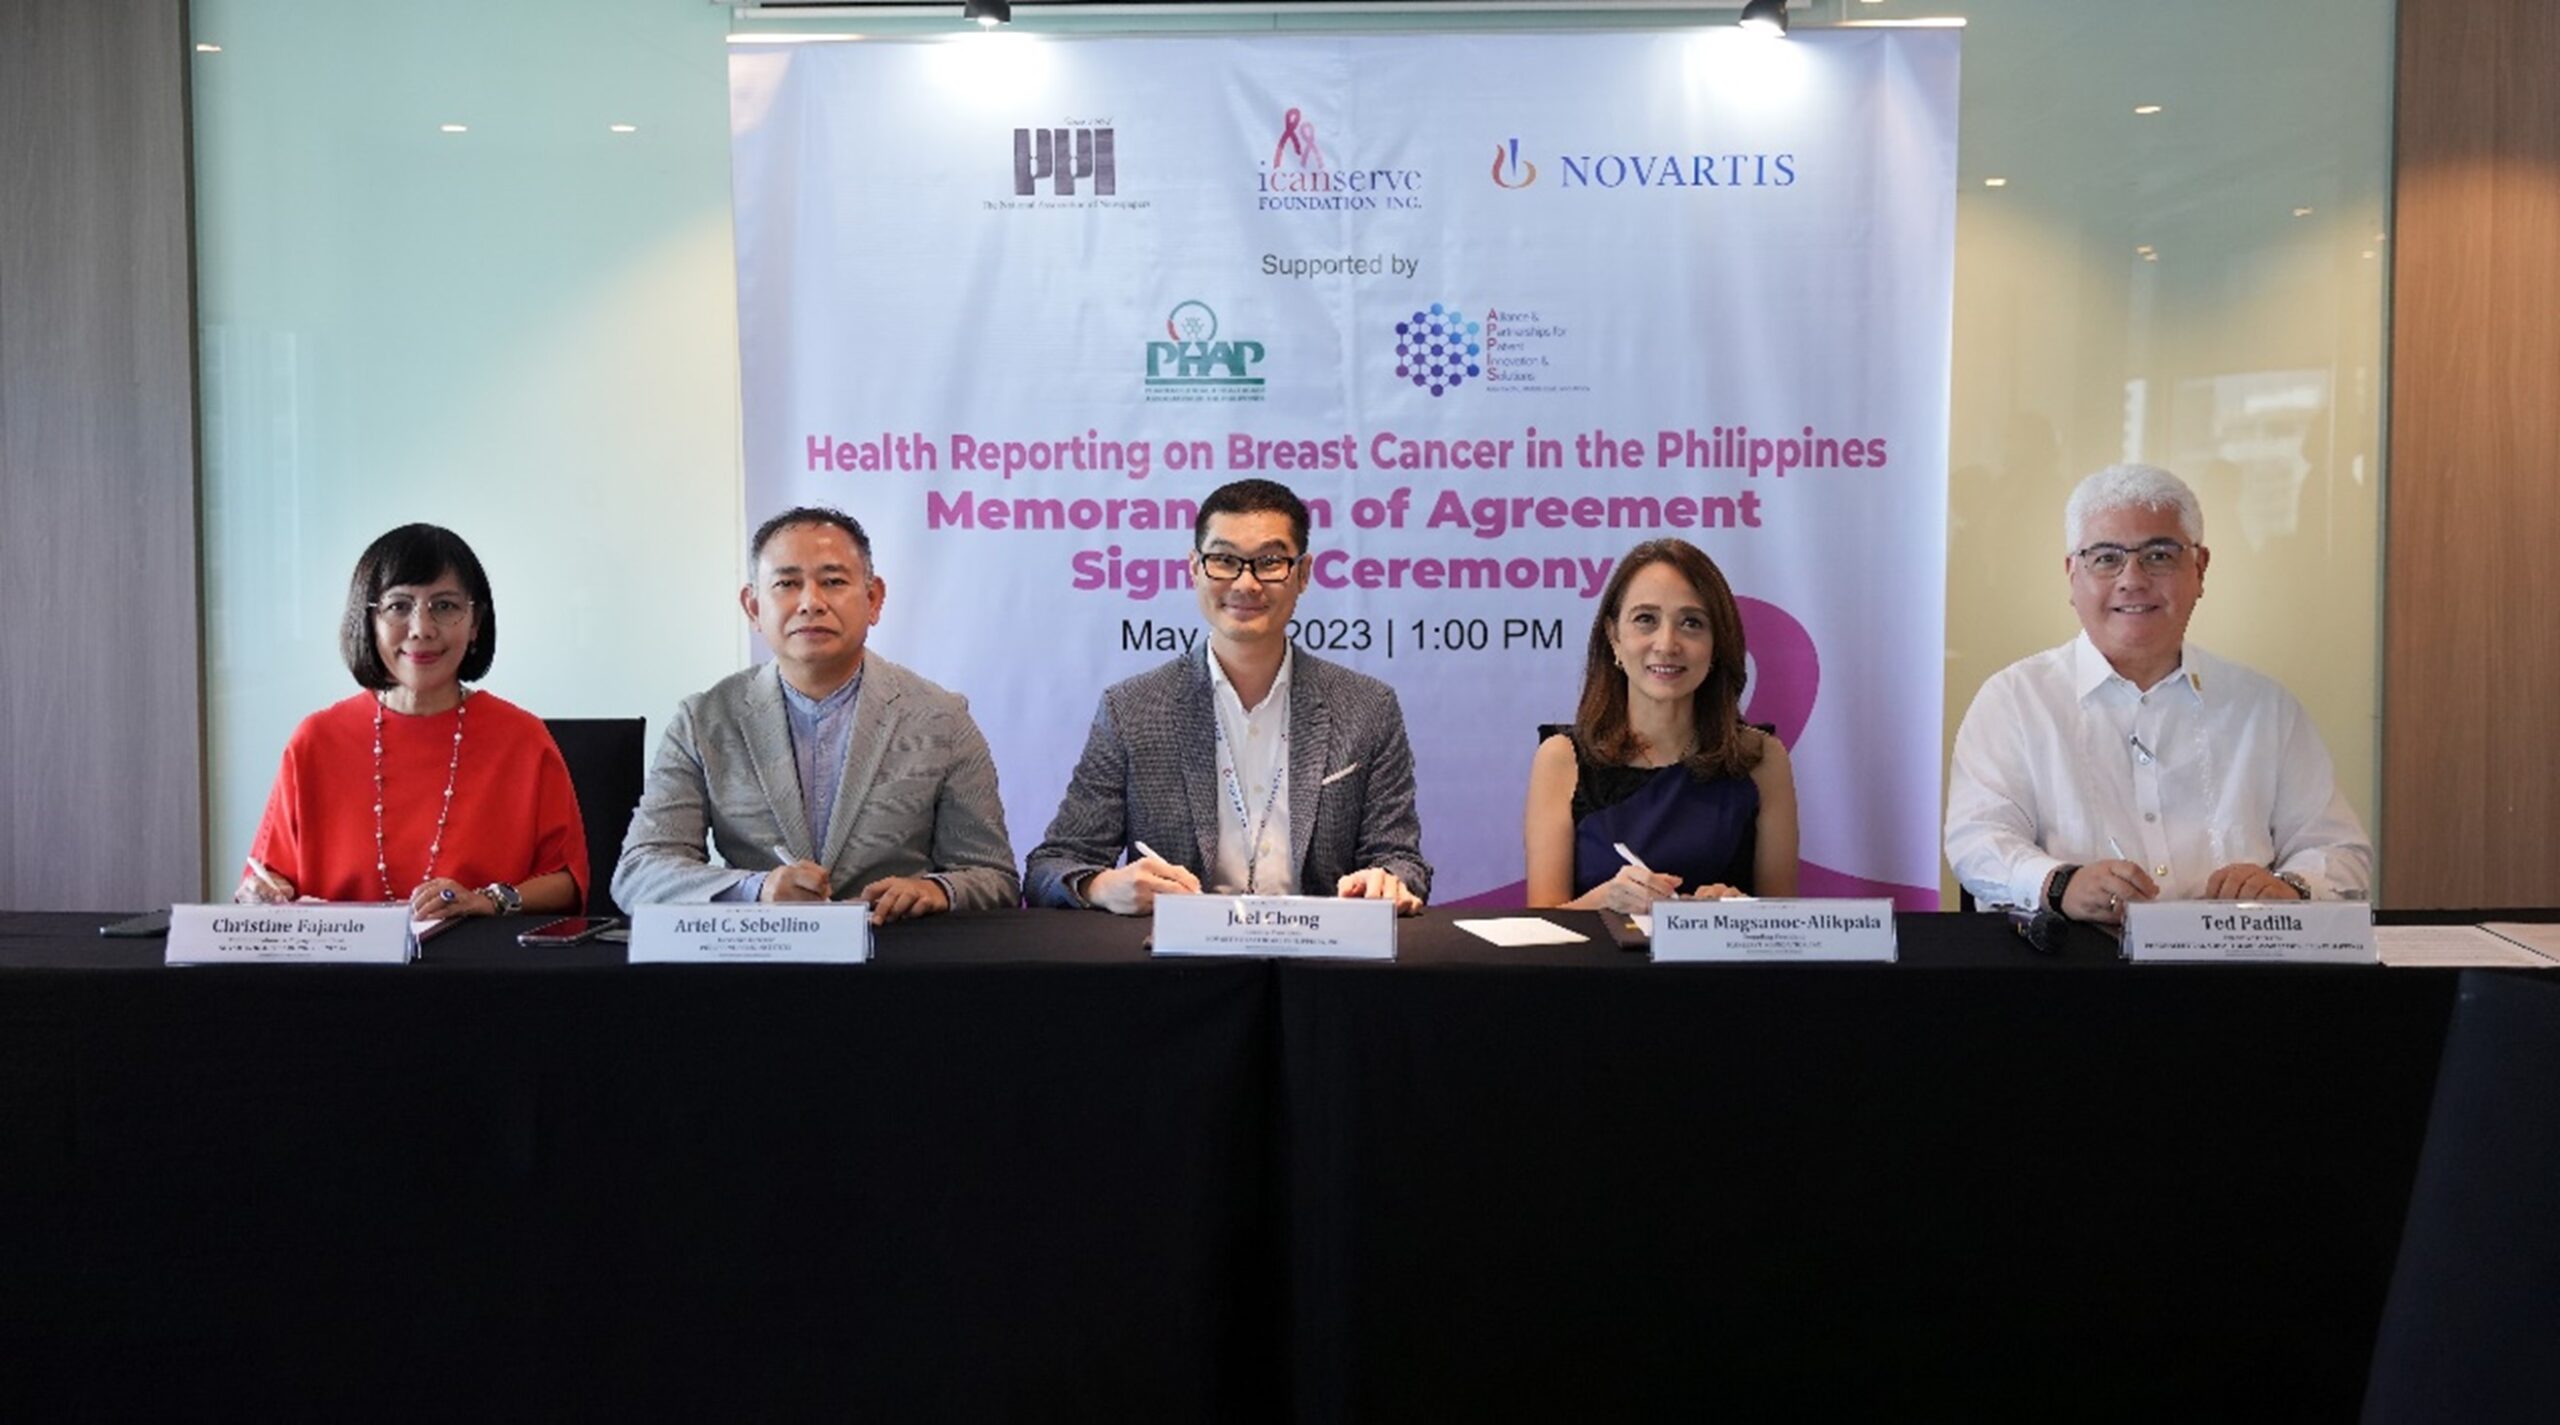 <em>Recognizing the key role of media in health literacy promotion, Novartis Healthcare Philippines, Philippine Press Institute (PPI), and ICanServe Foundation have signed a Memorandum of Agreement (MOA) to organize a workshop that aims to help local journalists gain a deeper understanding of breast cancer. Photo shows (from left) Ms. Christine Fajardo, Communications &amp; Engagement Head, Novartis Healthcare Philippines &amp; Asia Aspiring Innovative Medicines; Mr. Ariel Sebellino, Executive Director, PPI; Mr. Joel Chong, President, Novartis Healthcare Philippines; Ms. Kara Magsanoc-Alikpala, Founding President of ICanServe Foundation and Vice President for Internal Affairs of Cancer Coalition Philippines; and Mr. Teodoro Padilla, Executive Director, Pharmaceutical and Healthcare Association of the Philippines (PHAP). Photo by Kier Labrador</em>